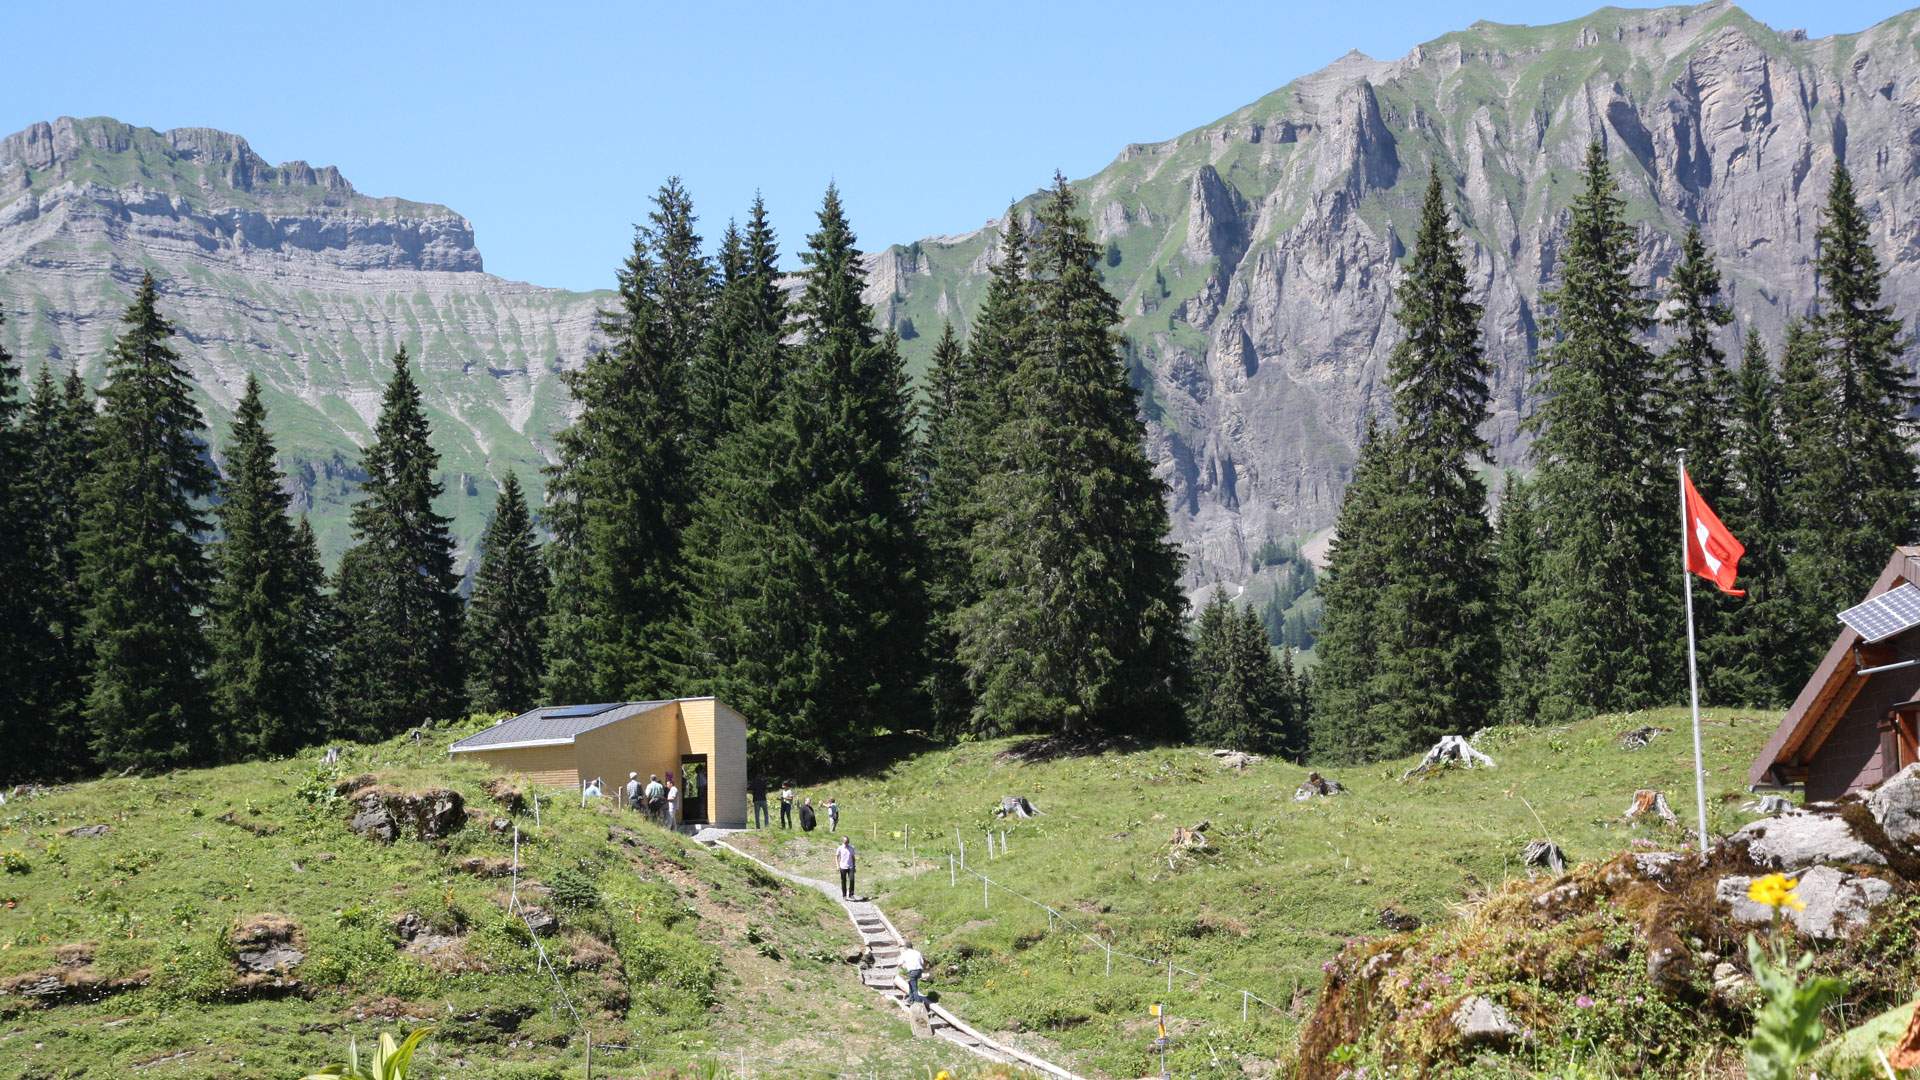 switzerland foundations promote both humanity and nature